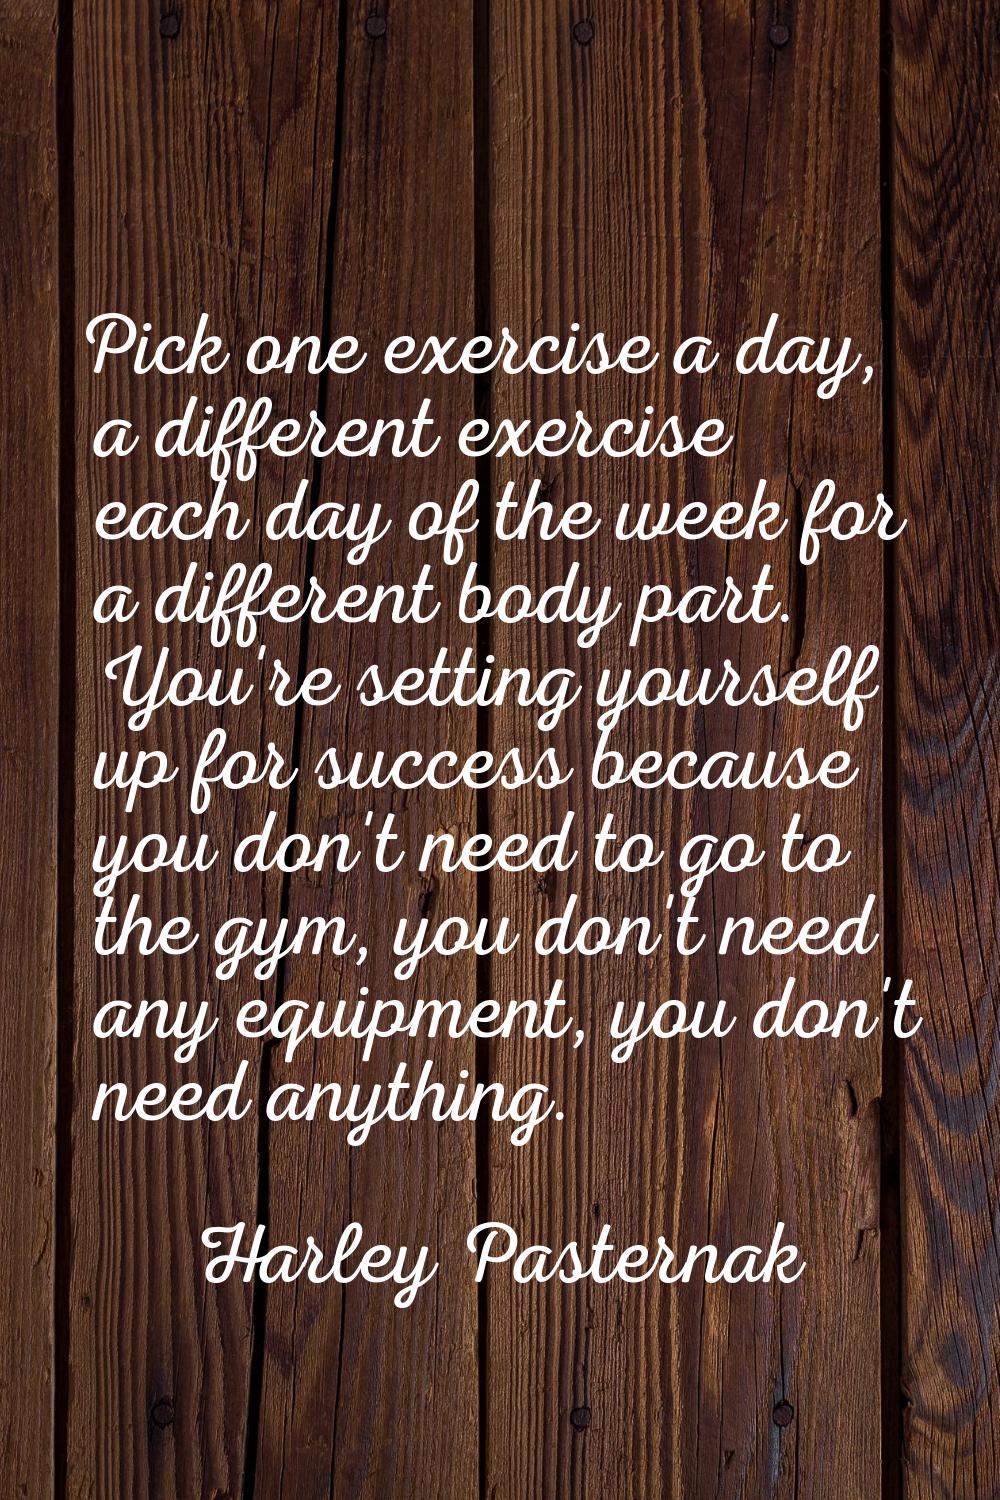 Pick one exercise a day, a different exercise each day of the week for a different body part. You'r